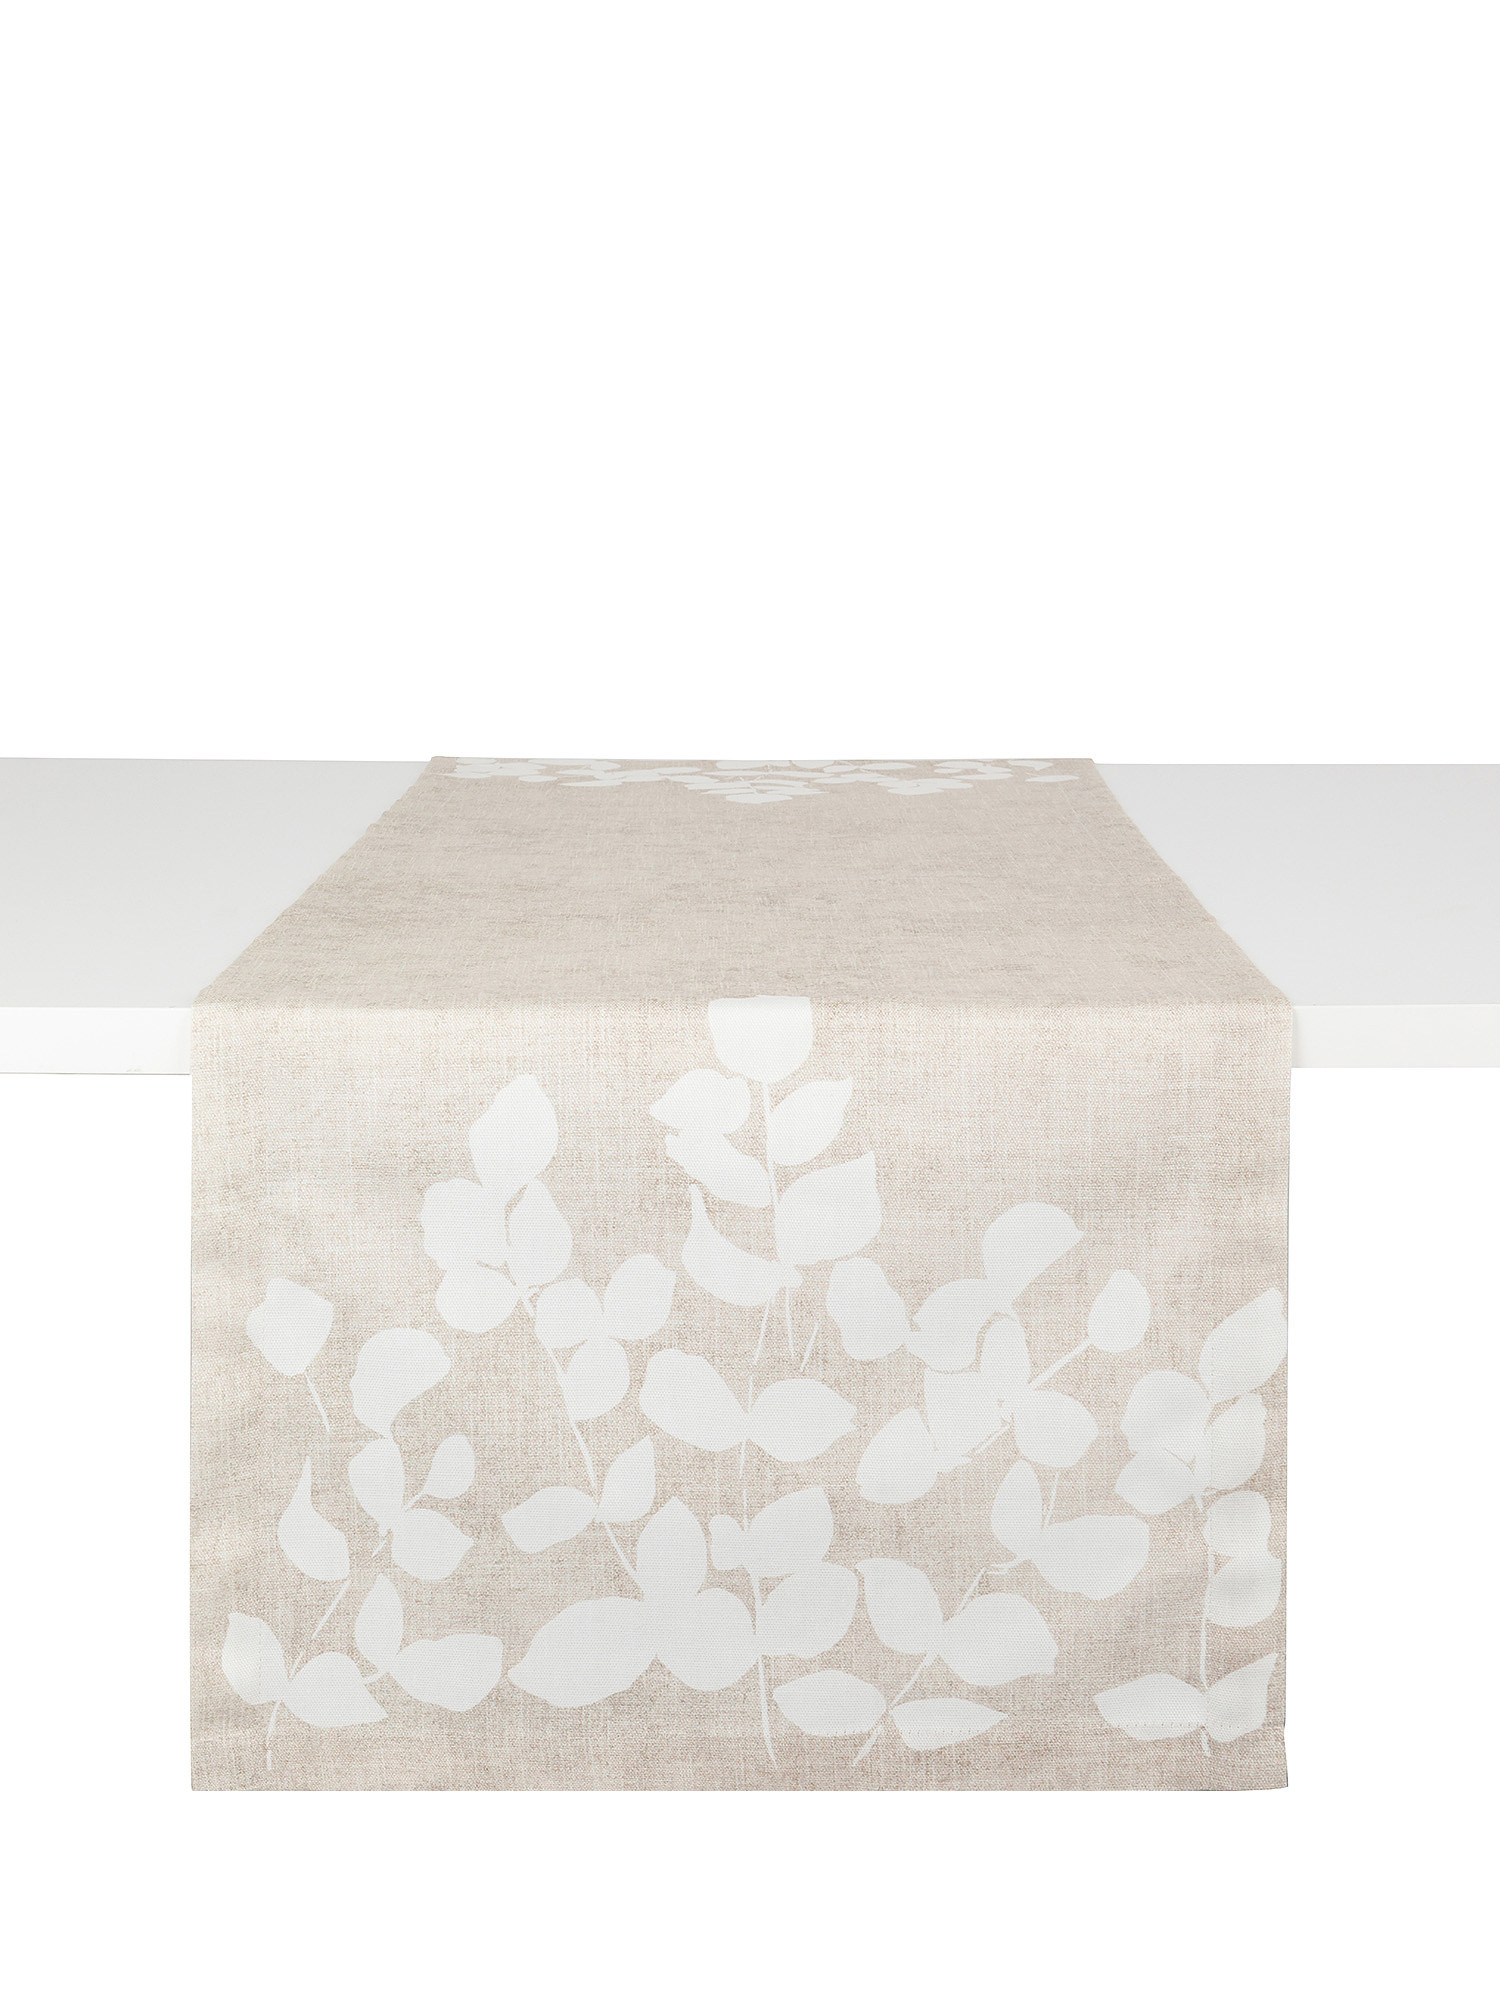 100% cotton table runner with floral print, Grey, large image number 0